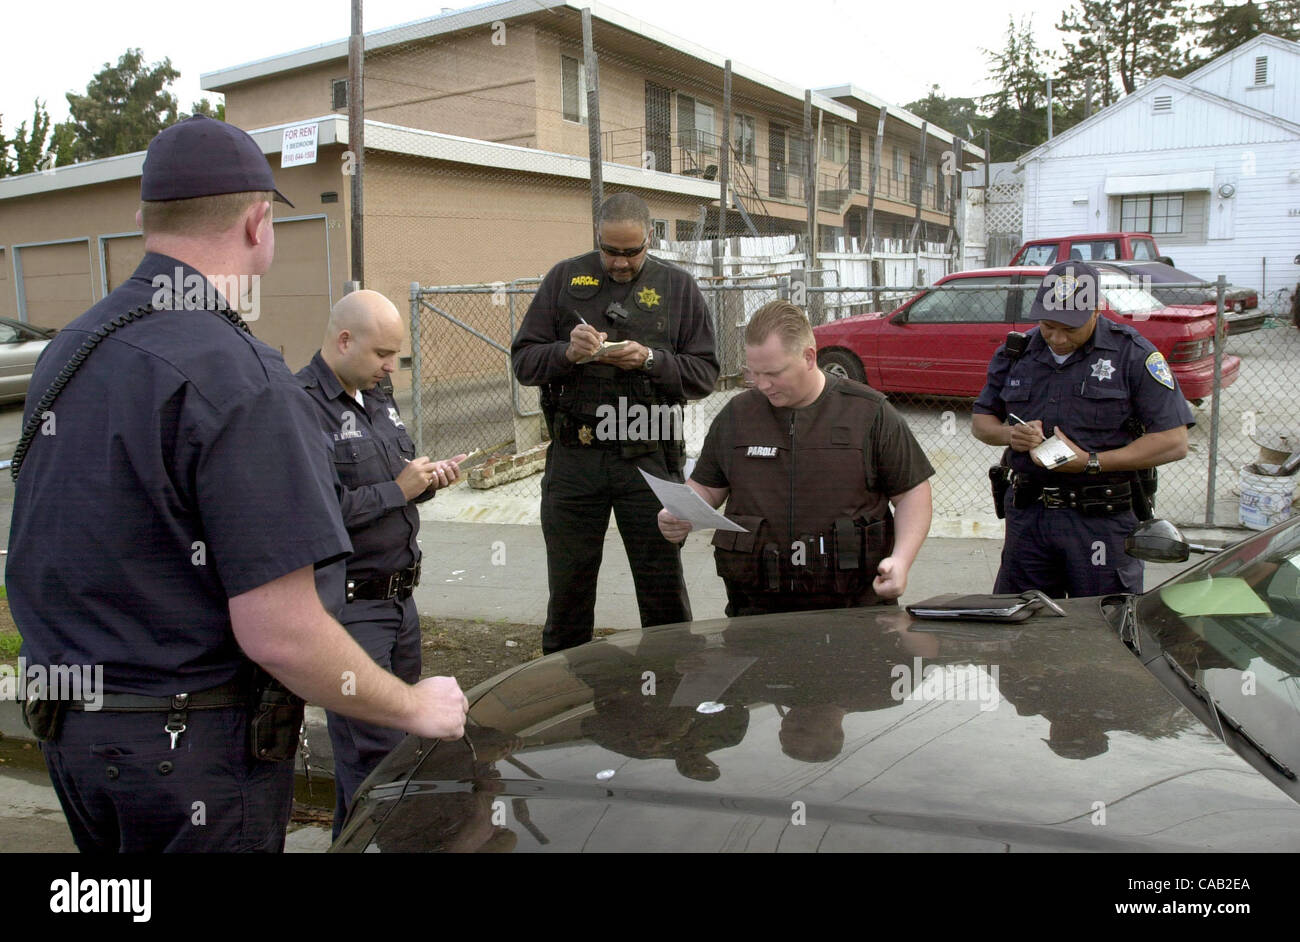 Oakland Parole agent officer Bent (2nd from right) goes over a face sheet with other member of the PACT team as they take notes in Oakland Wednesday March 28, 2004. (Contra Costa Times/Bob Larson)2004 Stock Photo